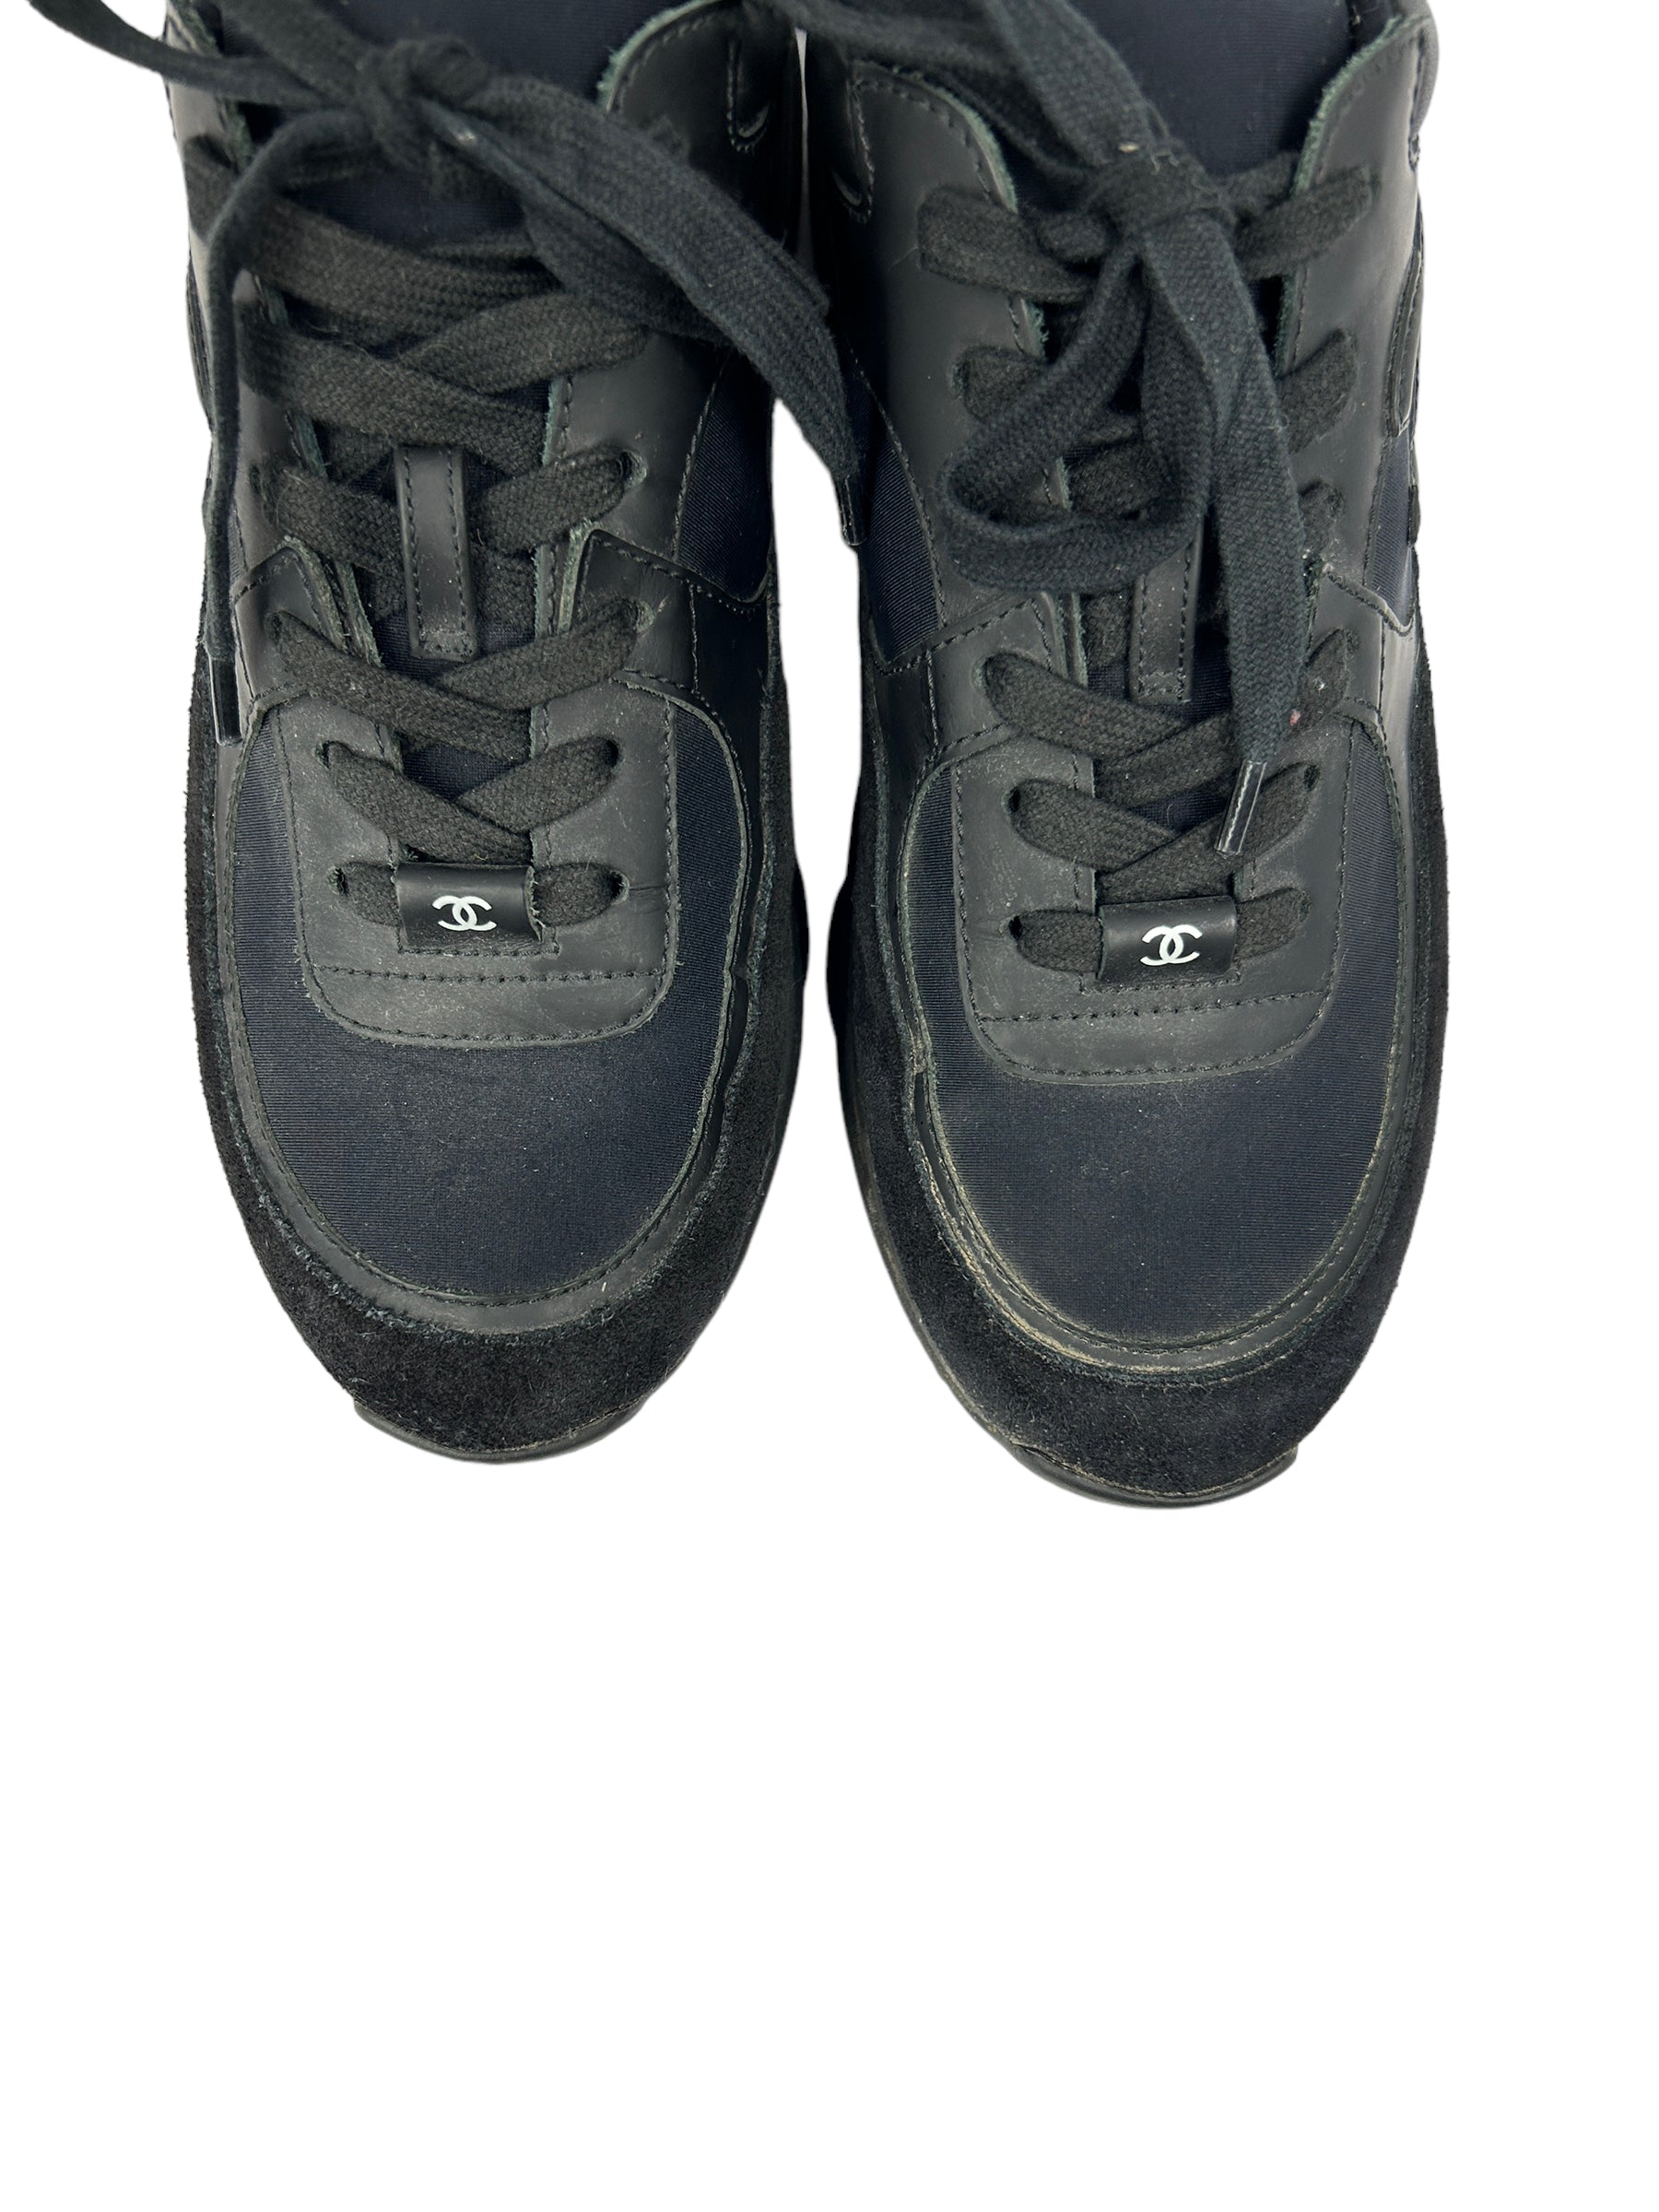 Black Leather/ Suede Sneakers